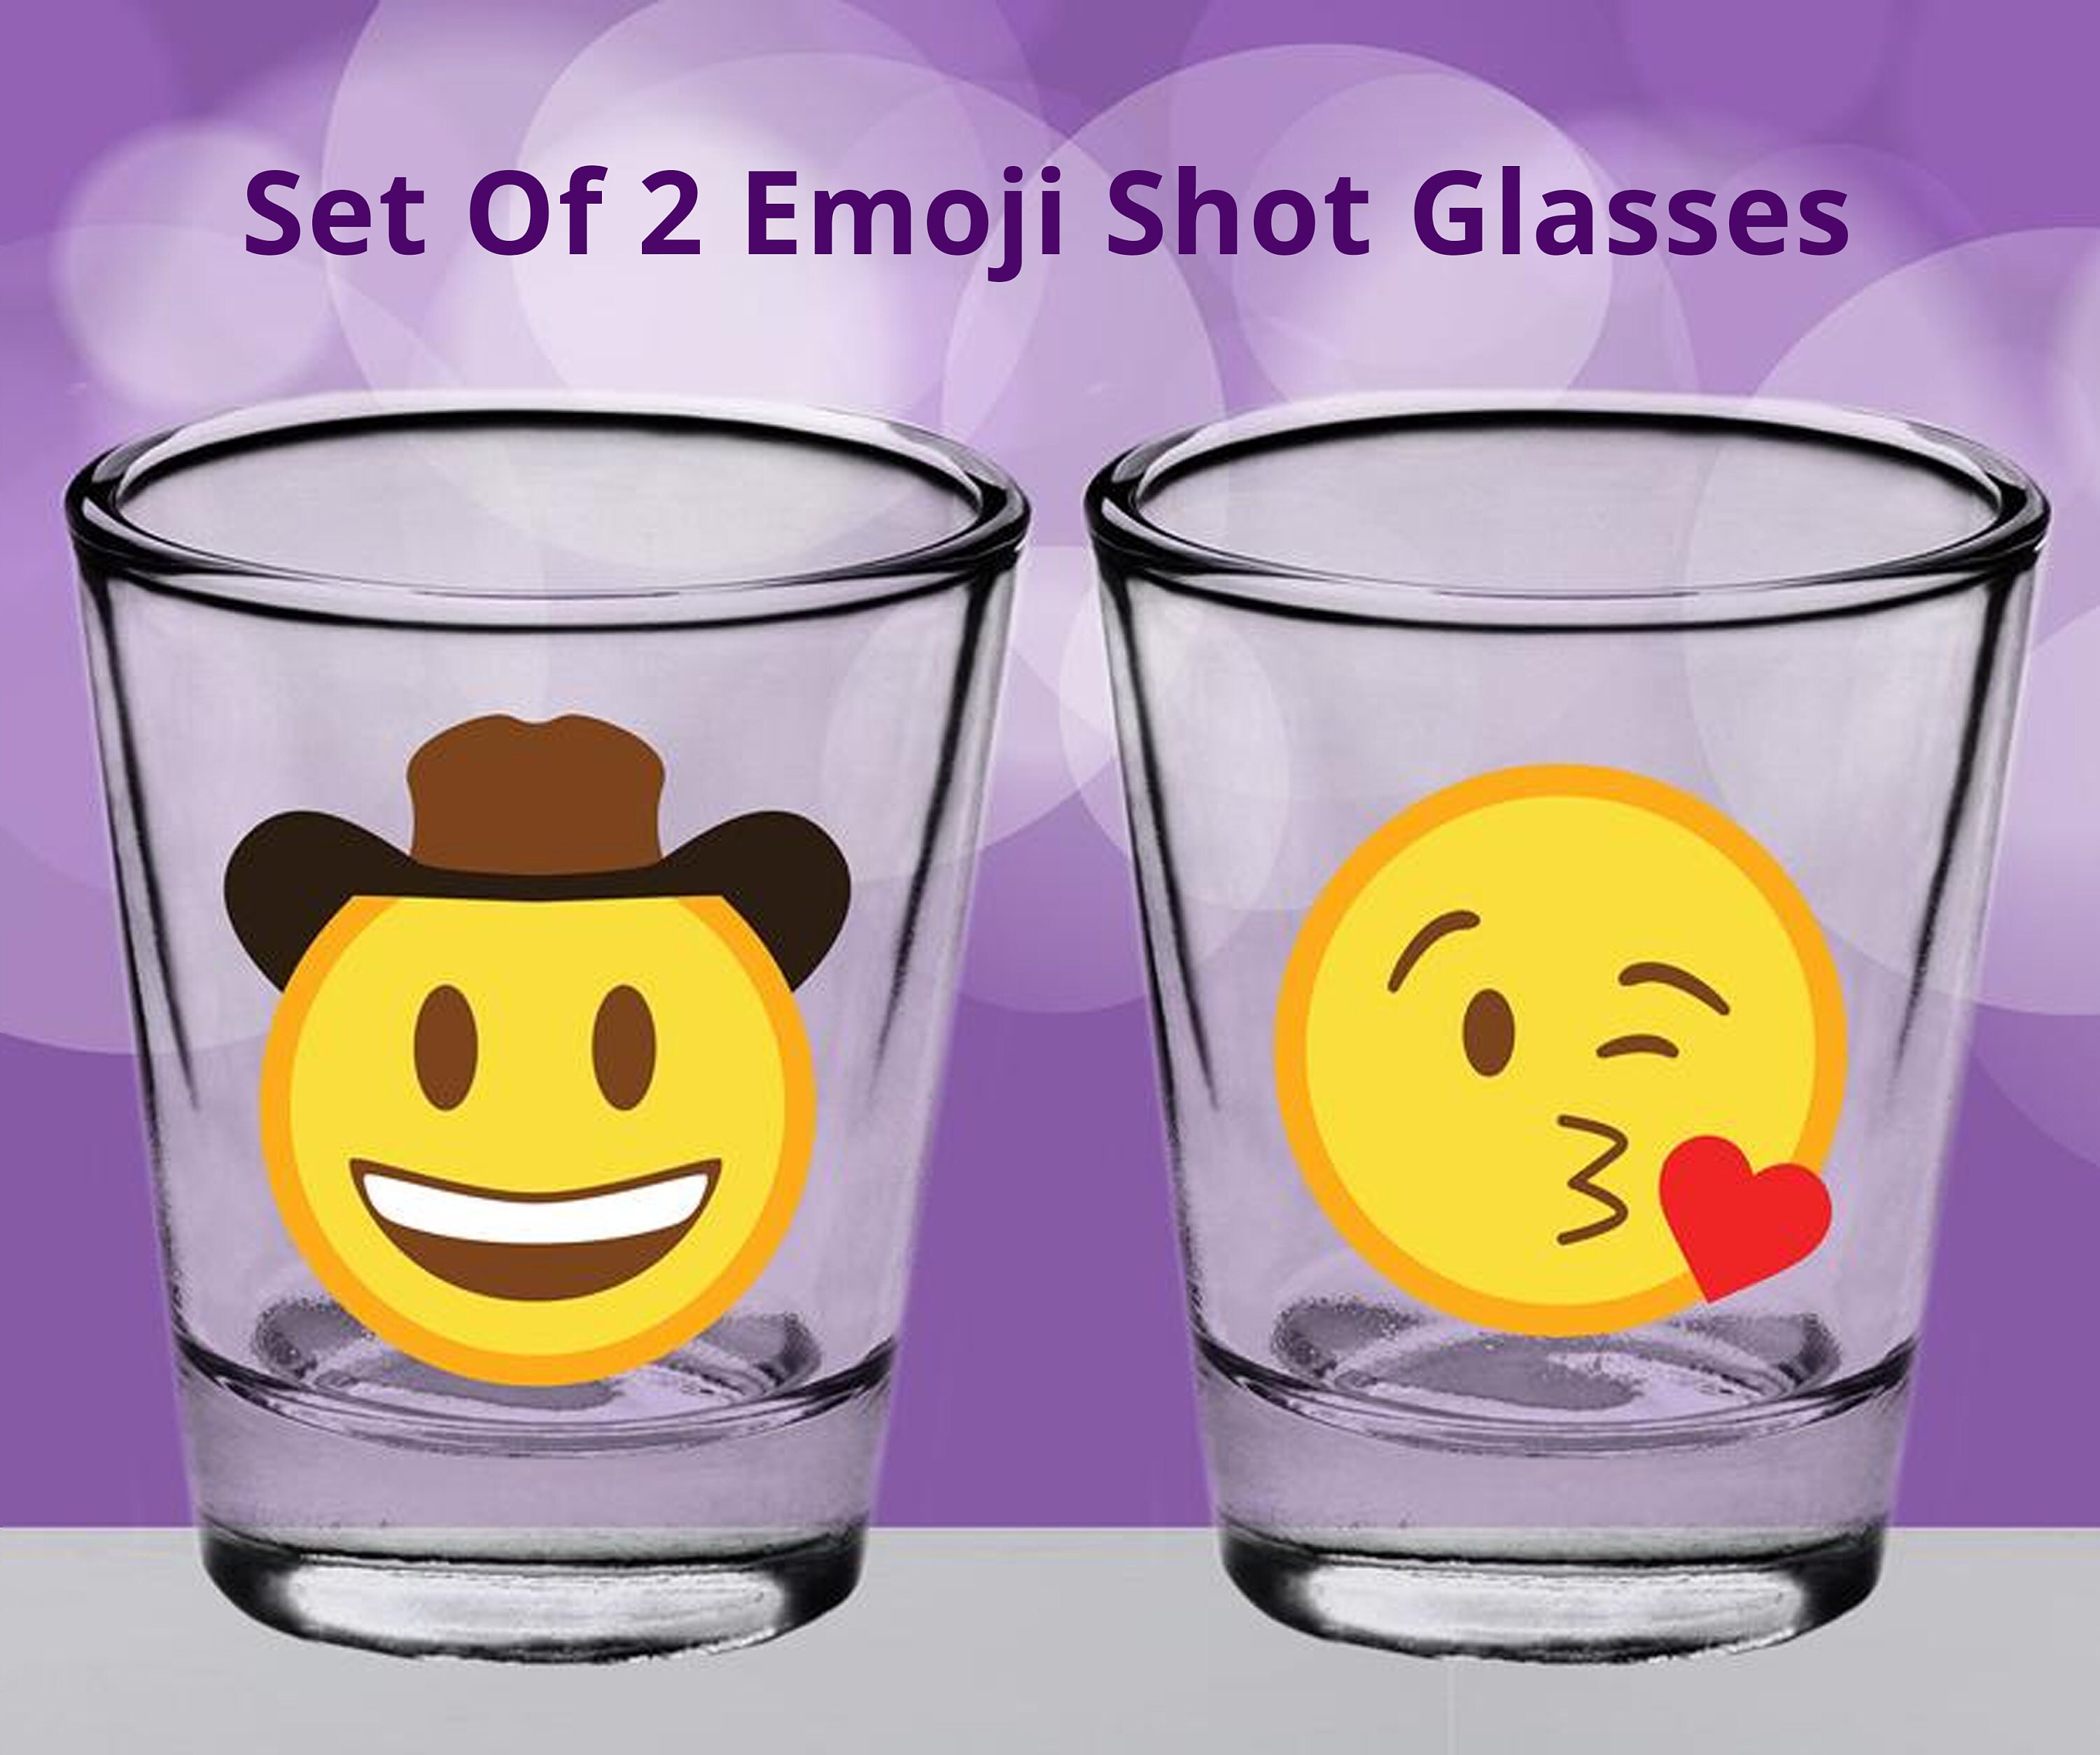 Funny Imprinted Messages Fun Emoji Shot Glasses Describing Your Group of Friends Set of 6 